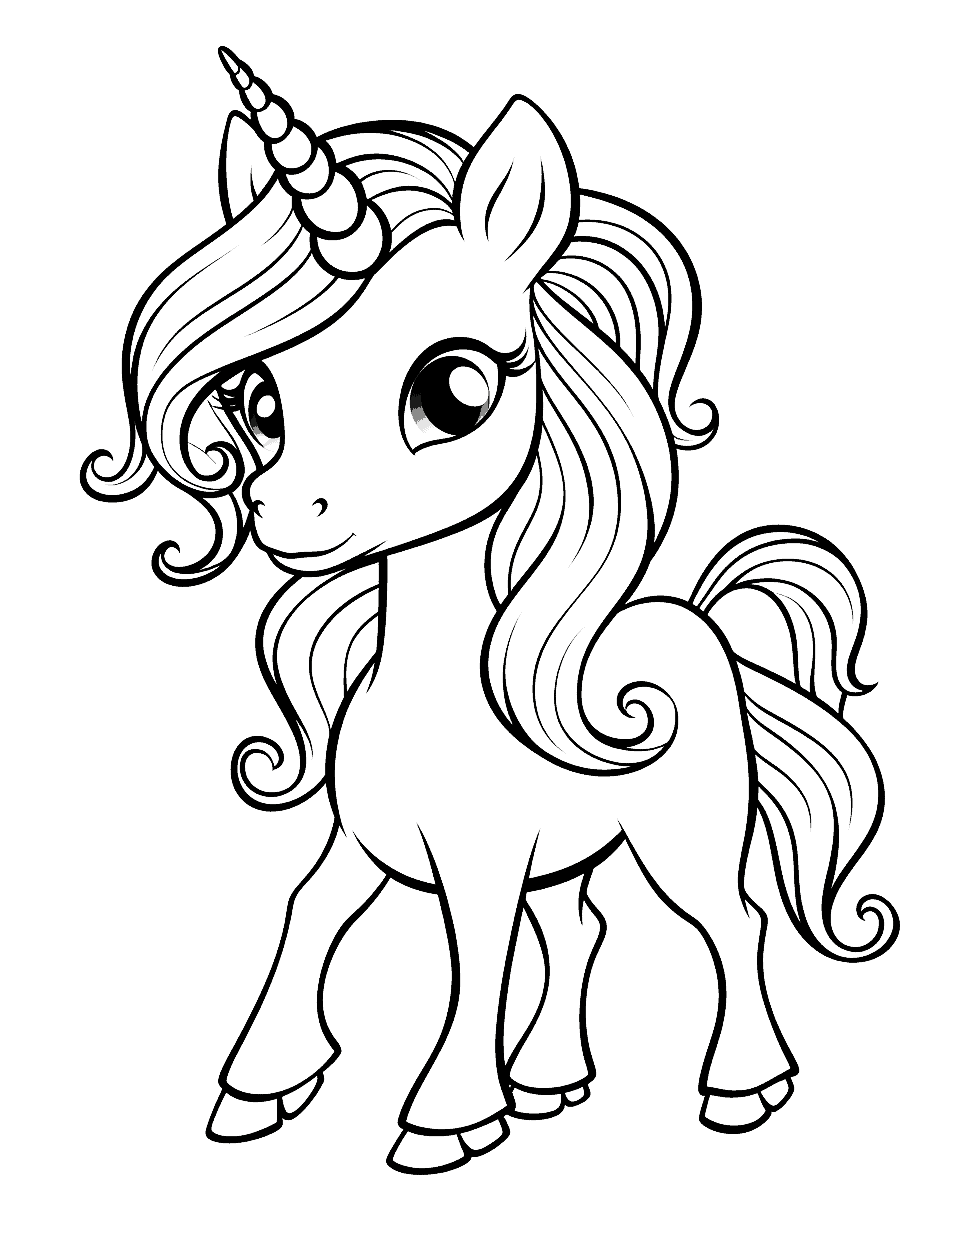 Kawaii Unicorn Coloring Page - A whimsically cute, anime-style unicorn with big, sparkling eyes and a fluffy mane.